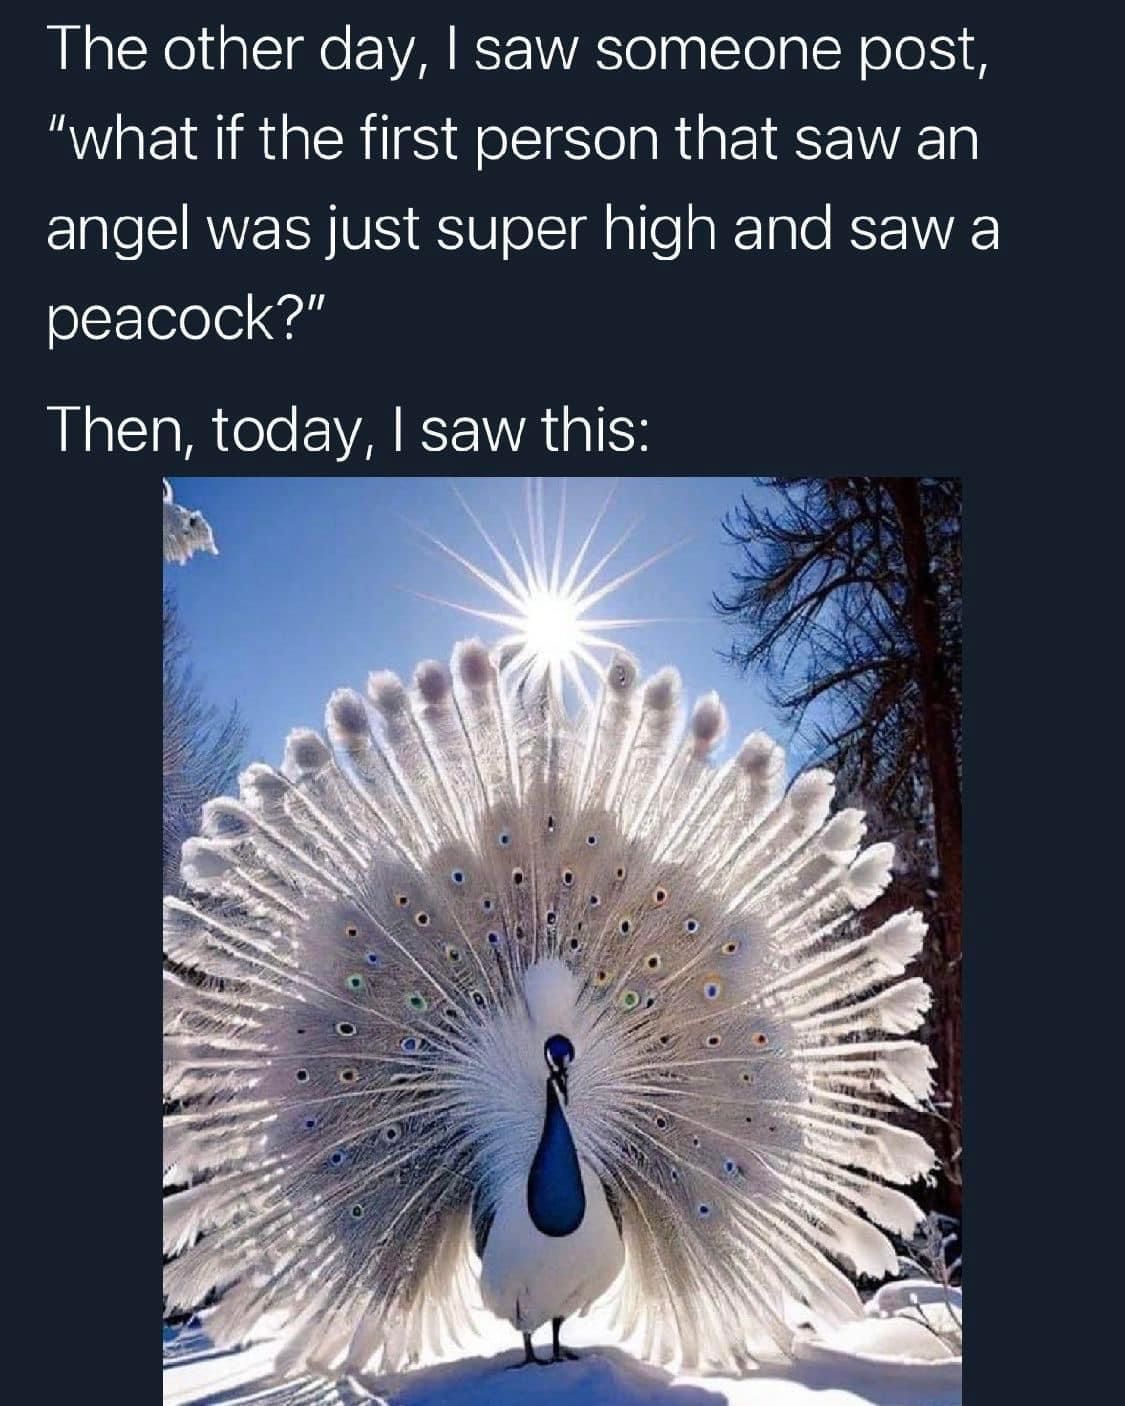 what if the first person that saw an angel was just super high and saw a peacock, then today, i saw this, peacock with white feathers in the sun